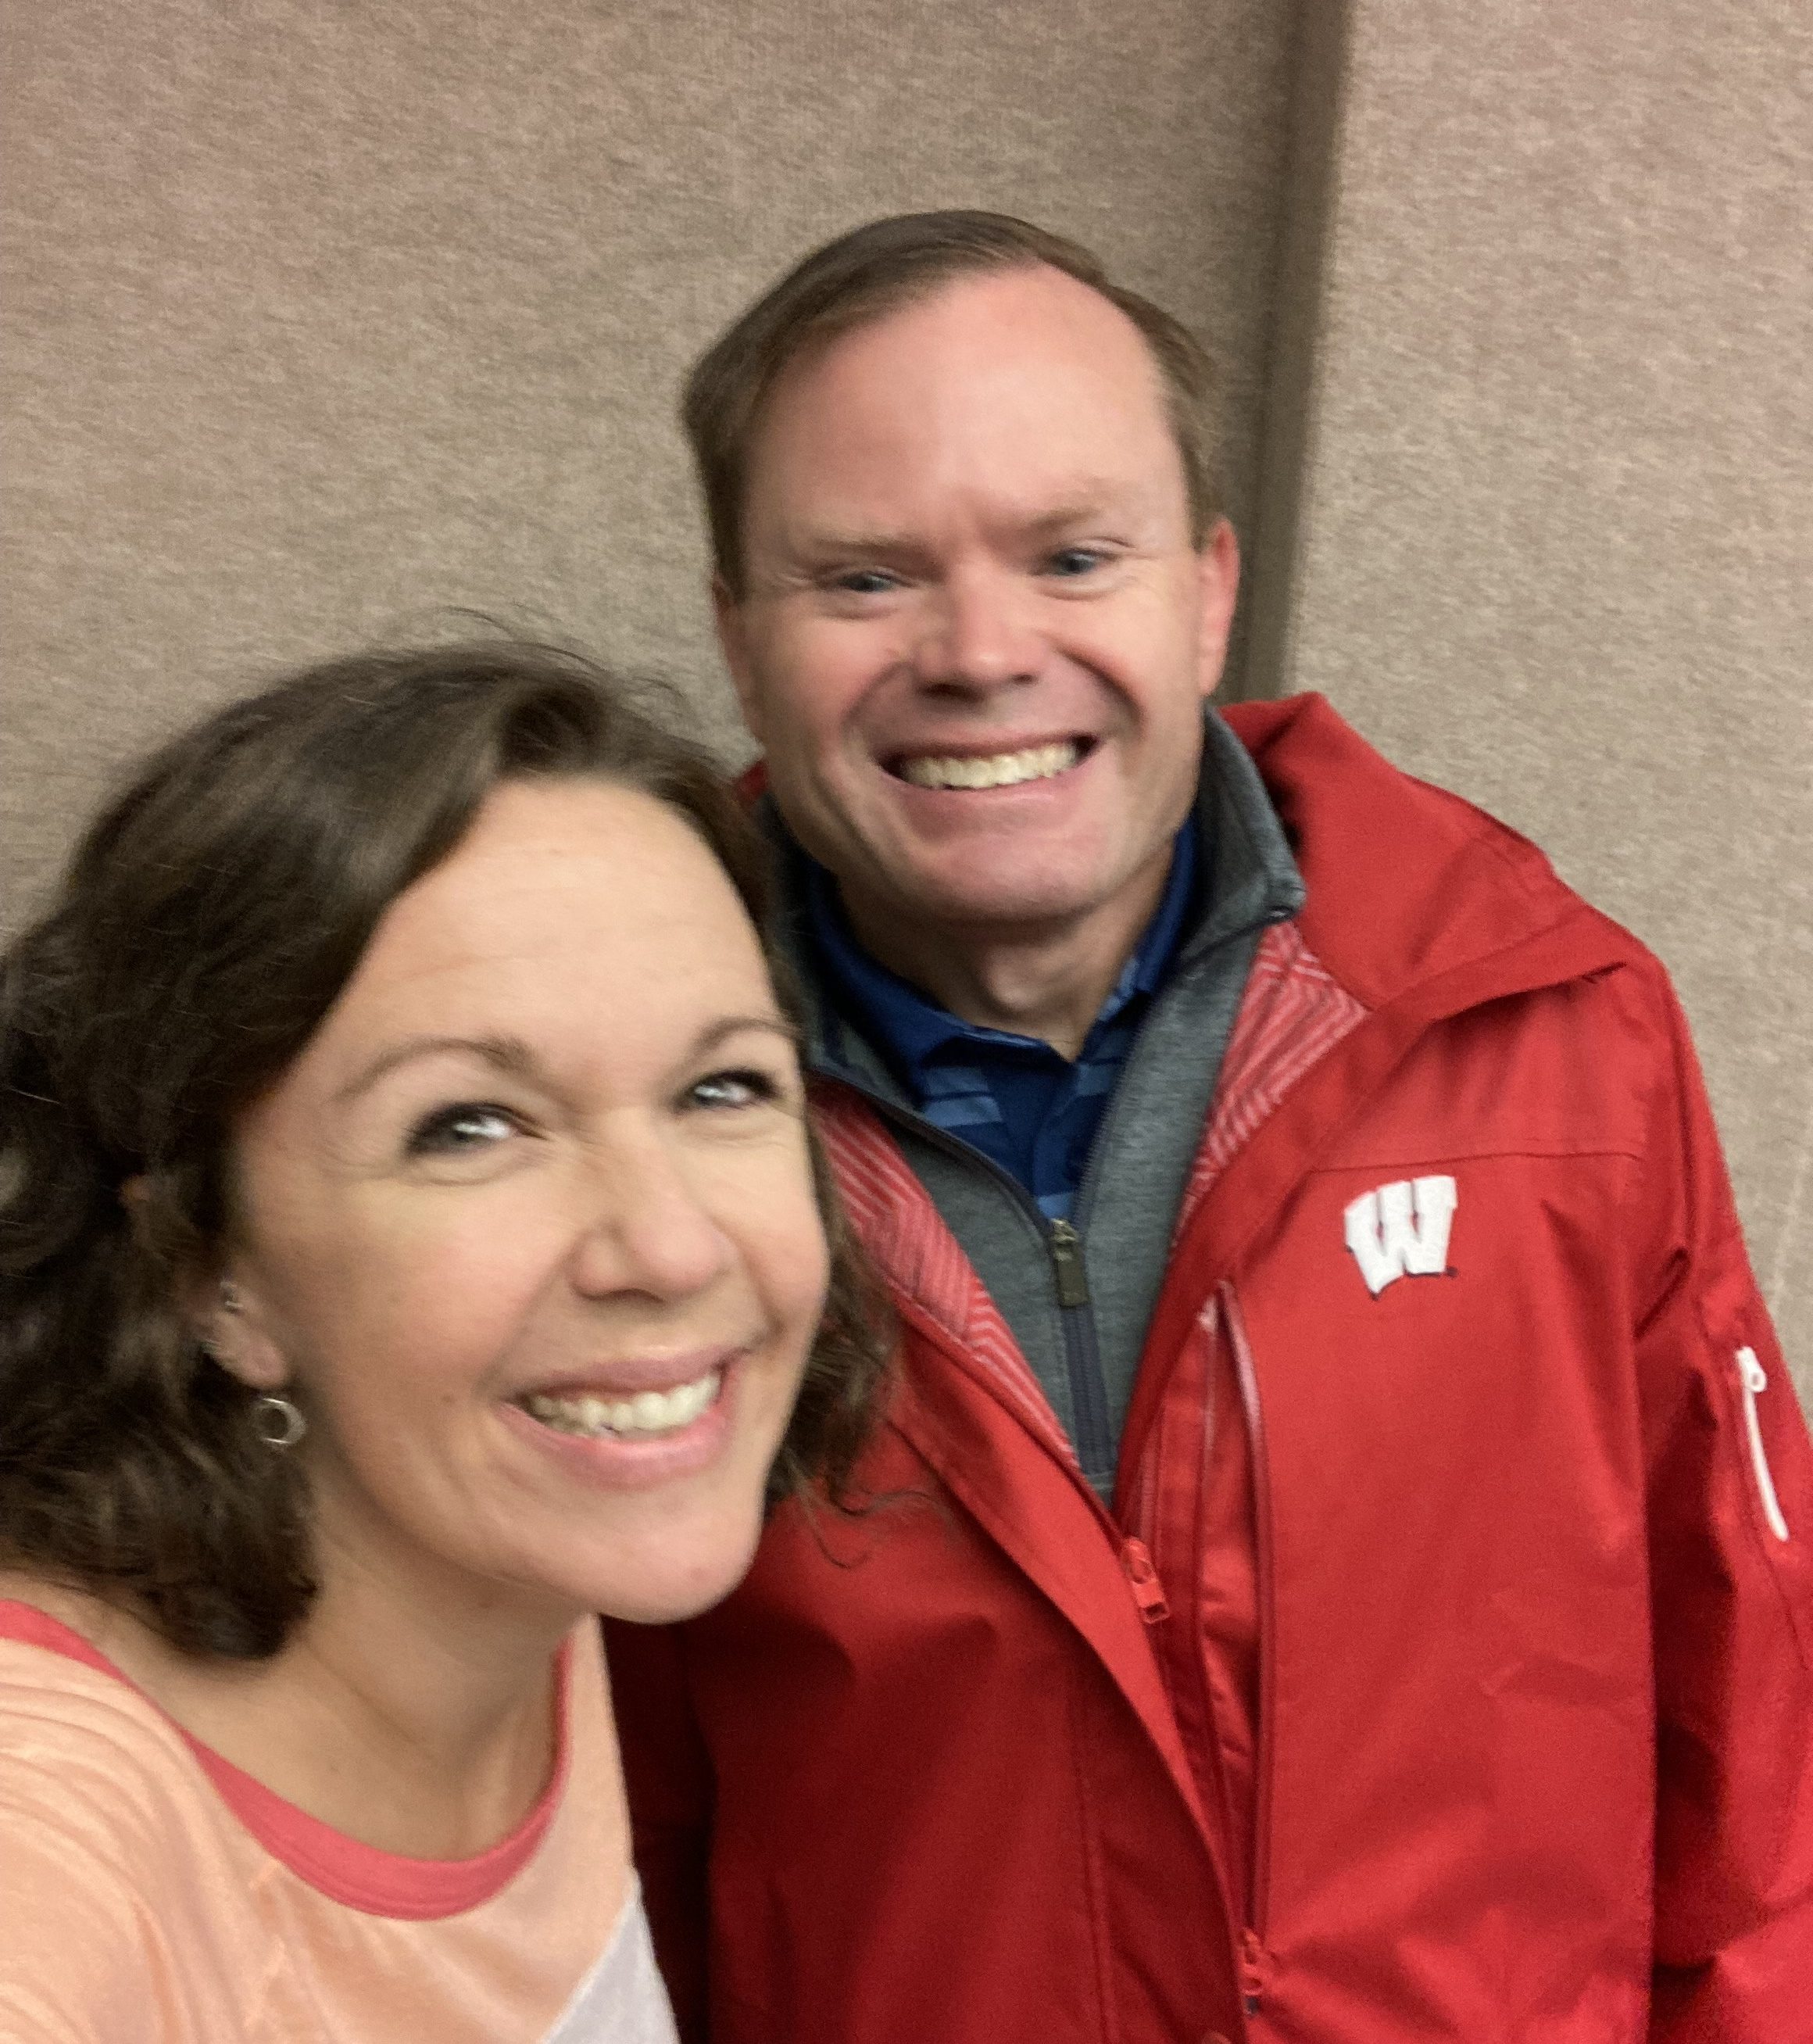 UW Badgers Homecoming with Brian Lucas